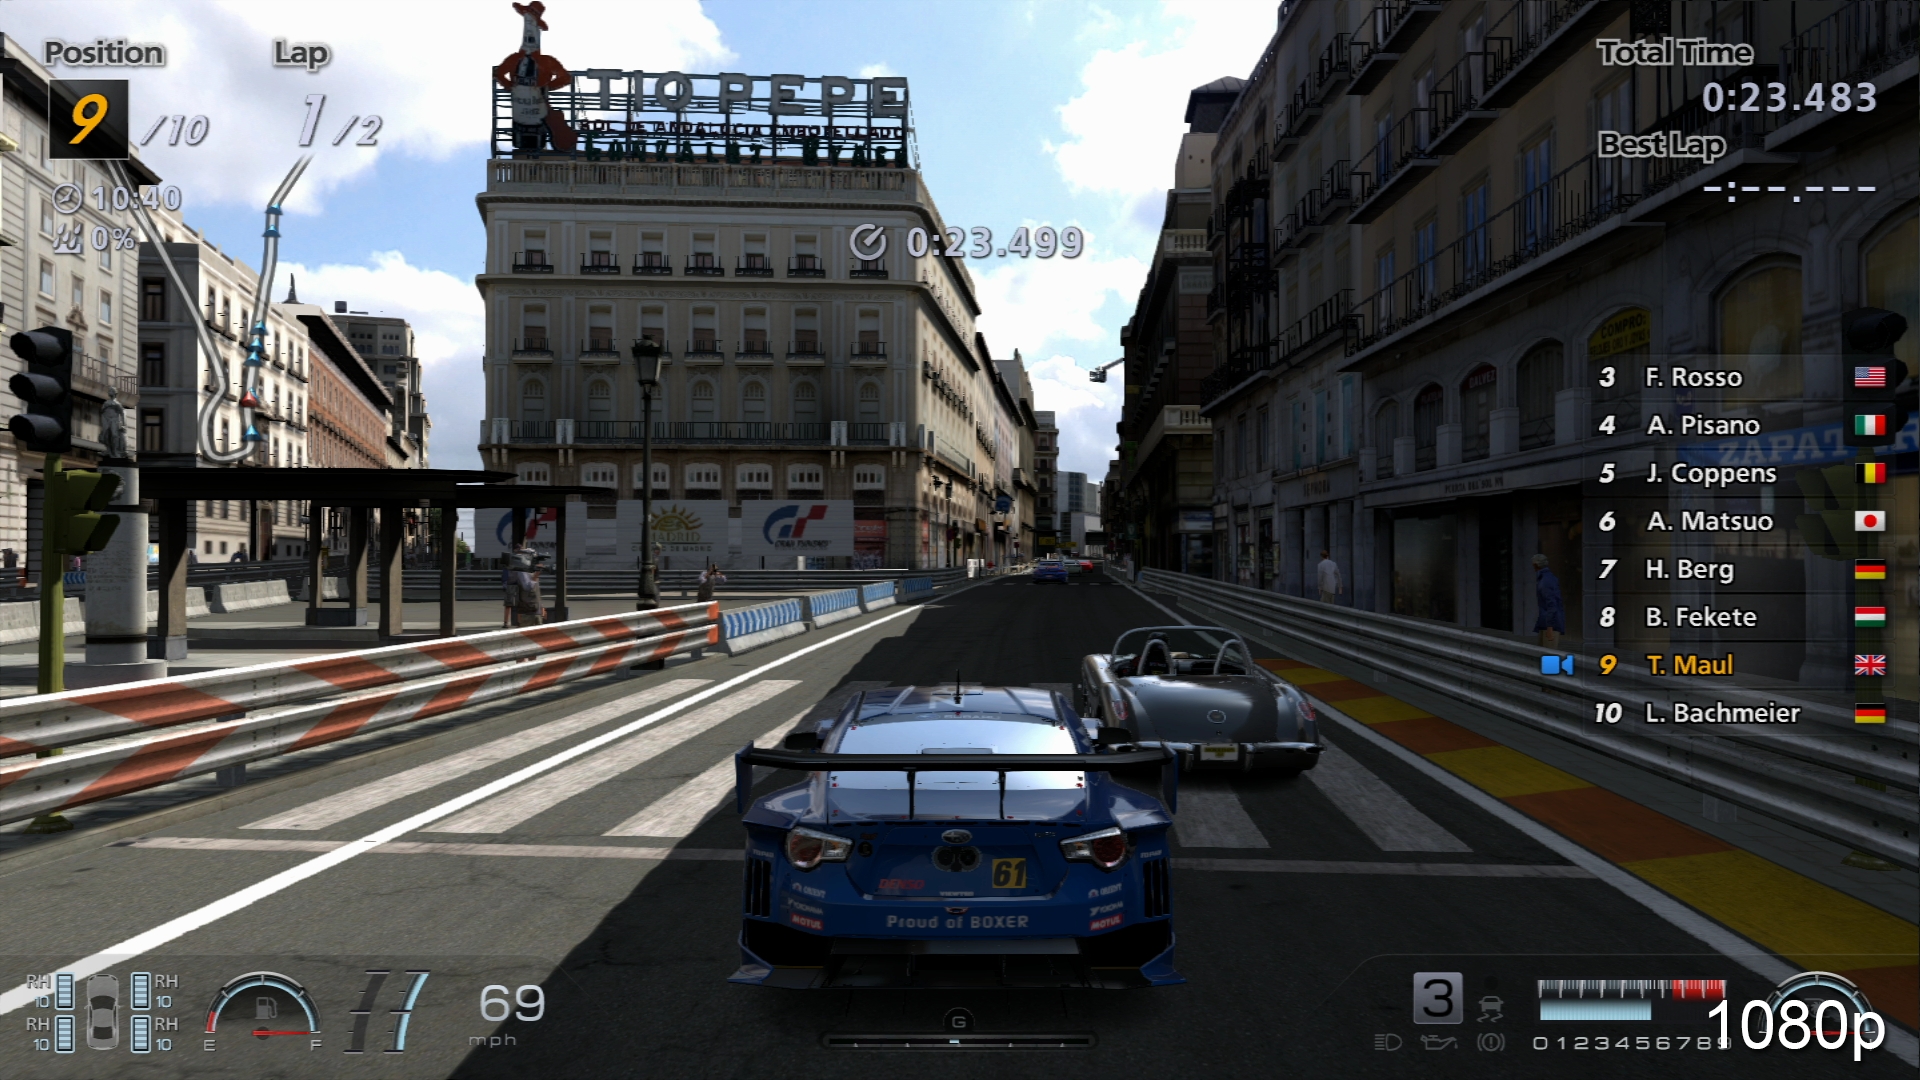 Buy Gran Turismo 6 for PS3